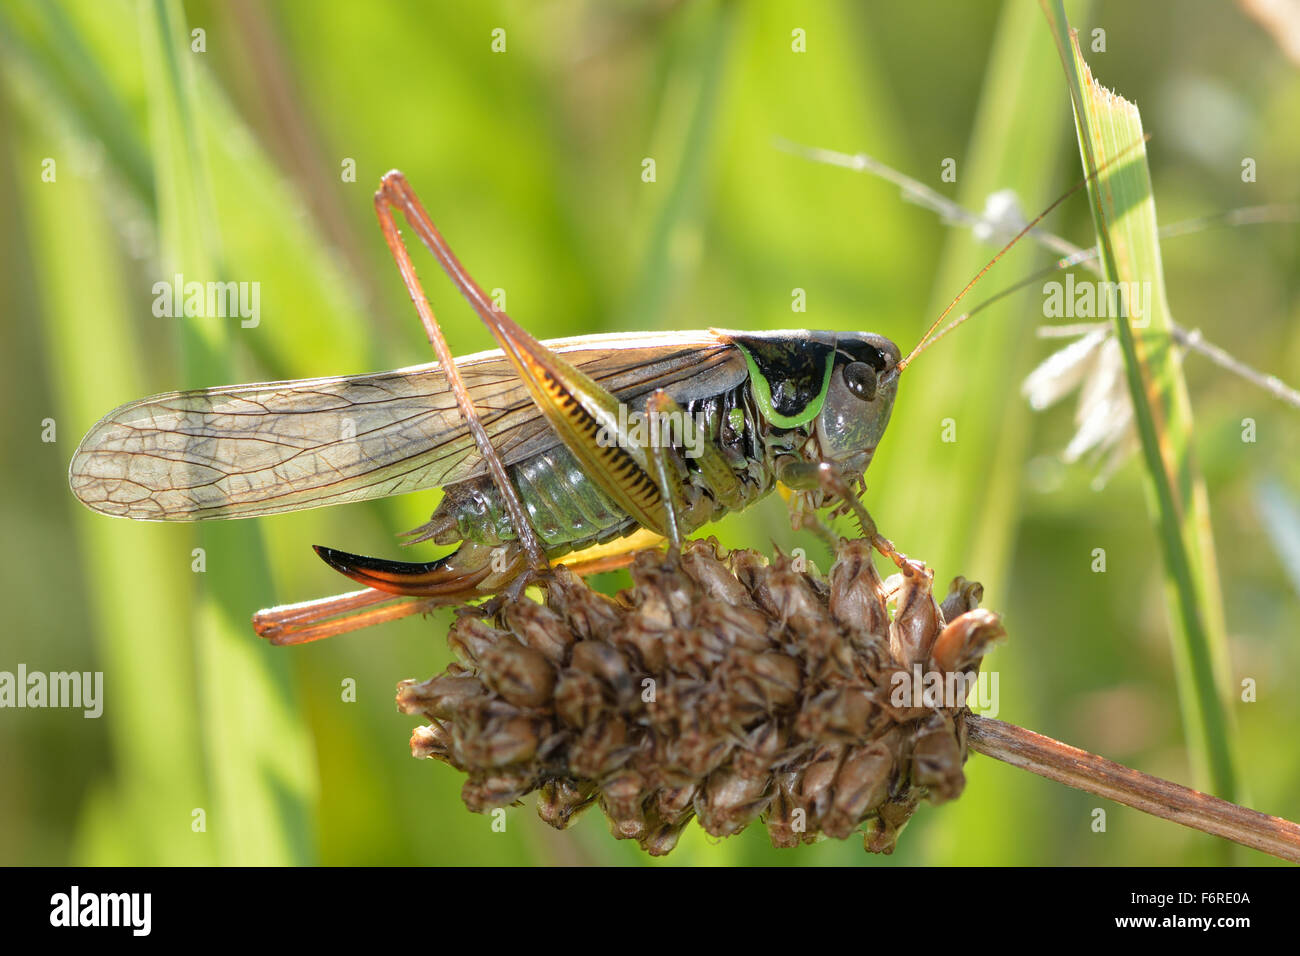 Winged forme de Roesel's bush (Metrioptera roeselii cricket) Banque D'Images